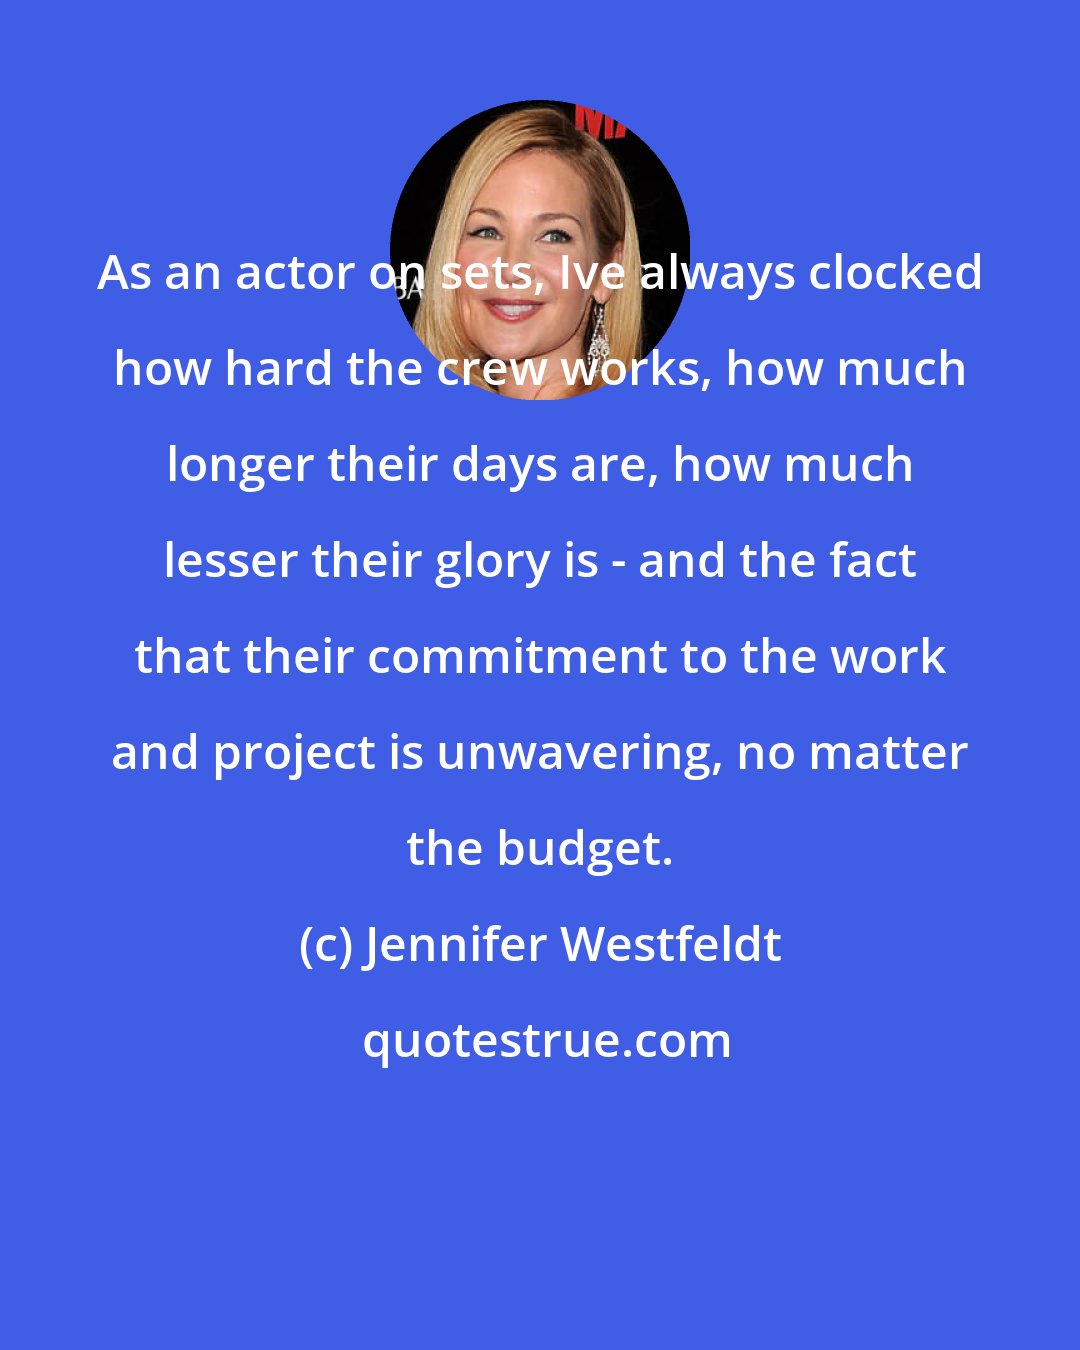 Jennifer Westfeldt: As an actor on sets, Ive always clocked how hard the crew works, how much longer their days are, how much lesser their glory is - and the fact that their commitment to the work and project is unwavering, no matter the budget.